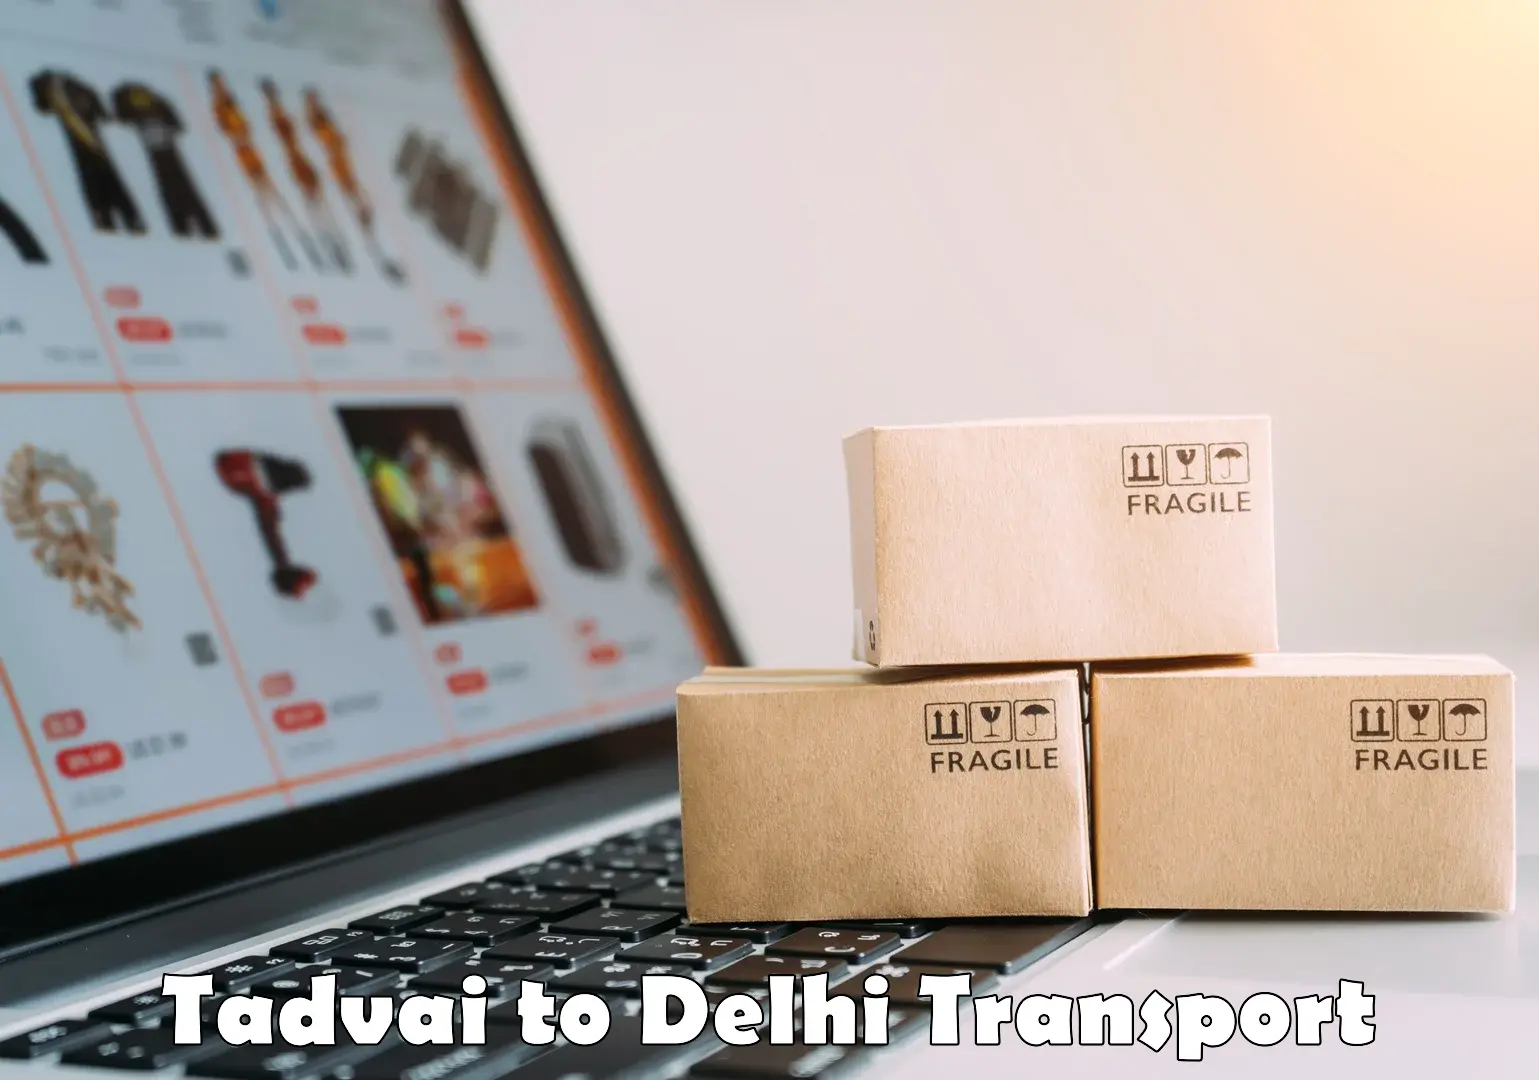 Nationwide transport services Tadvai to Delhi